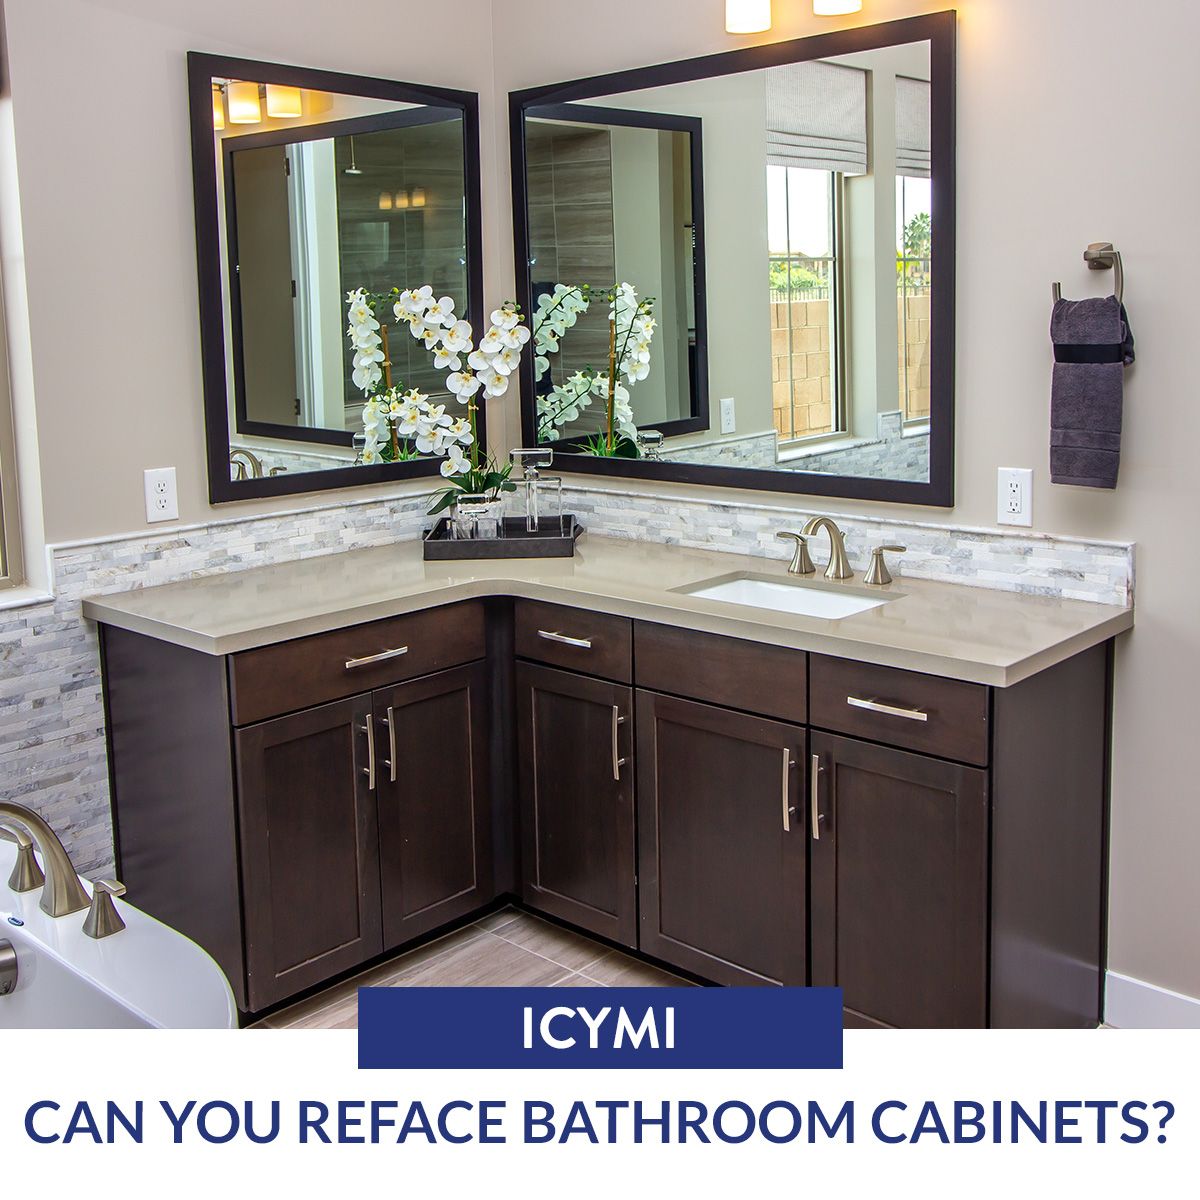 Can You Reface Bathroom Cabinets?